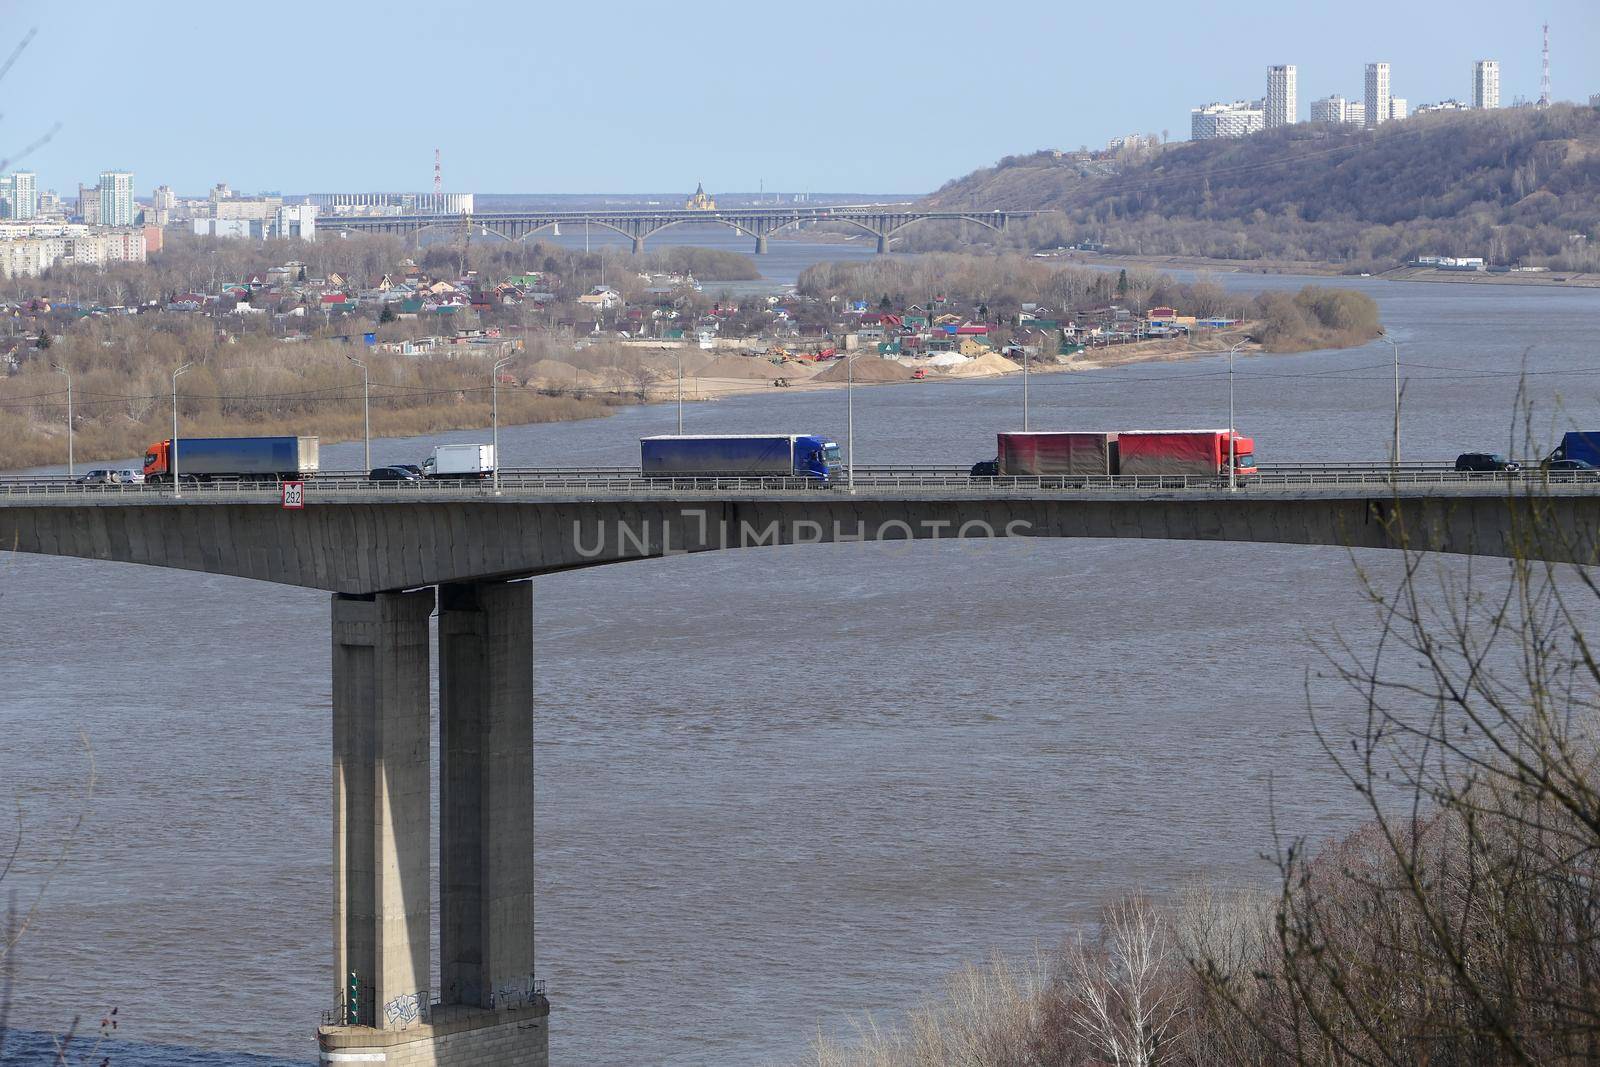 Large trucks drive over the bridge over the river in the city. High quality photo